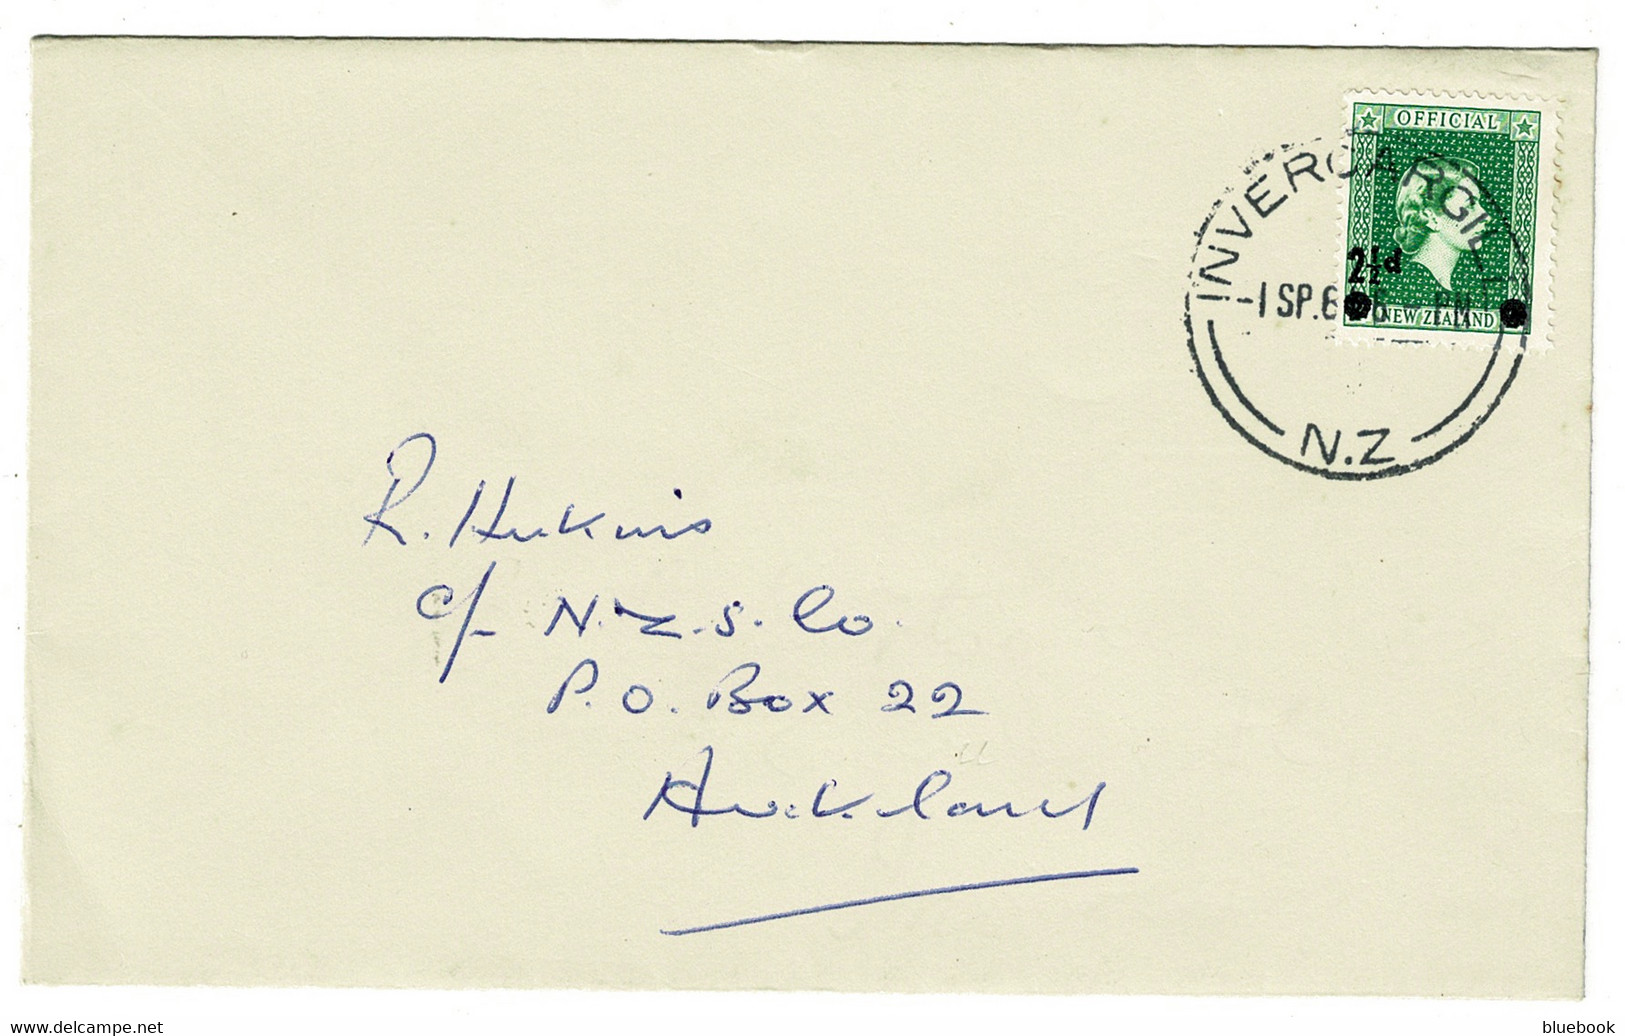 Ref 1553 -  1961 New Zealand FDC First Day Cover - 2 1/2d Official Opt - Invercargill Cancel - Private Use Of Official - Storia Postale